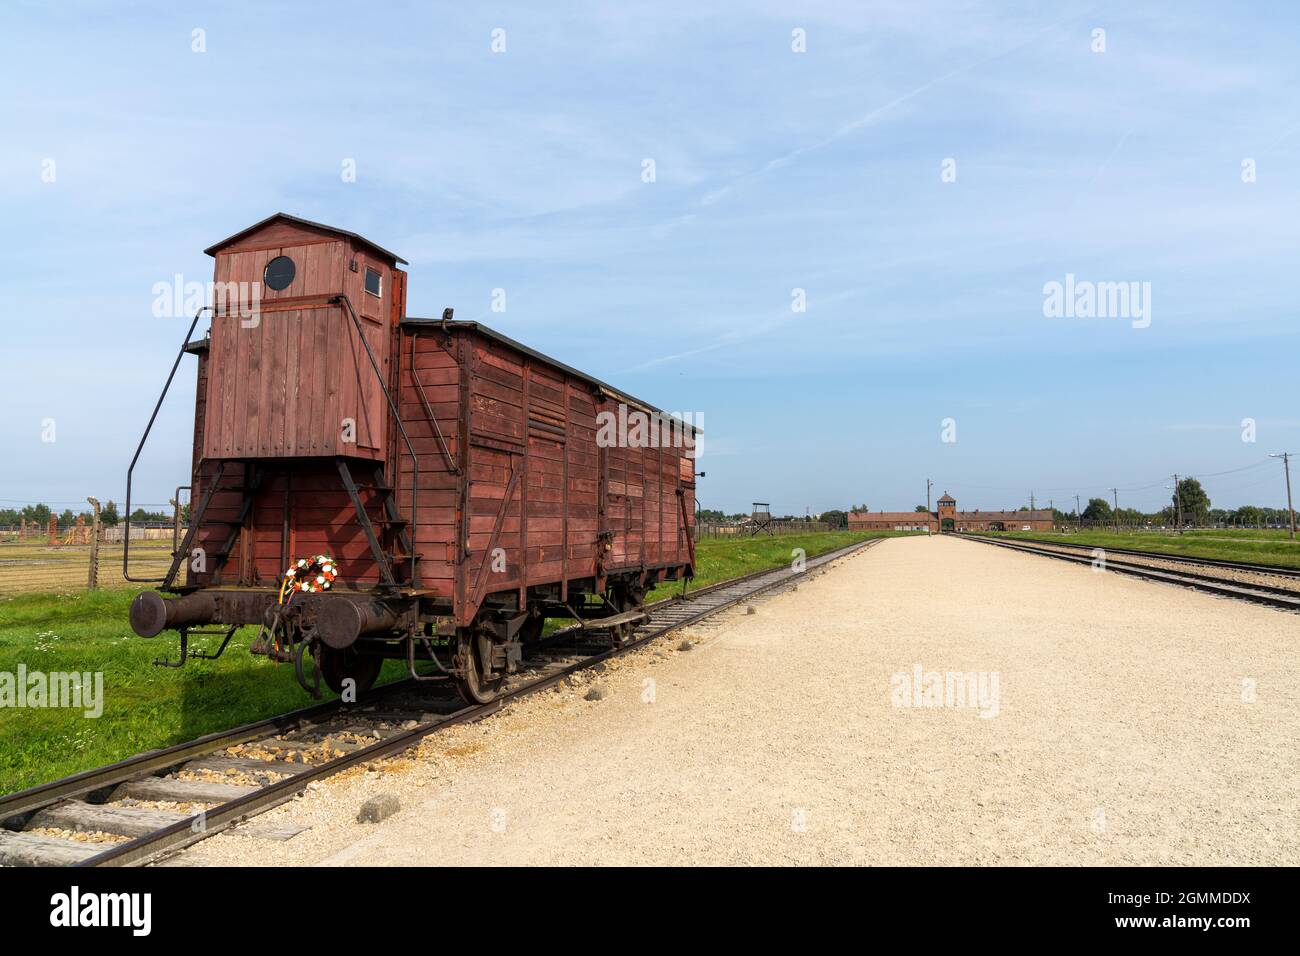 Auschwitz, Poland - 15 September, 2021: Auschwitz Concentration Camp in Poland with railroad tracks and a wooden carriage for transporting prisoners i Stock Photo